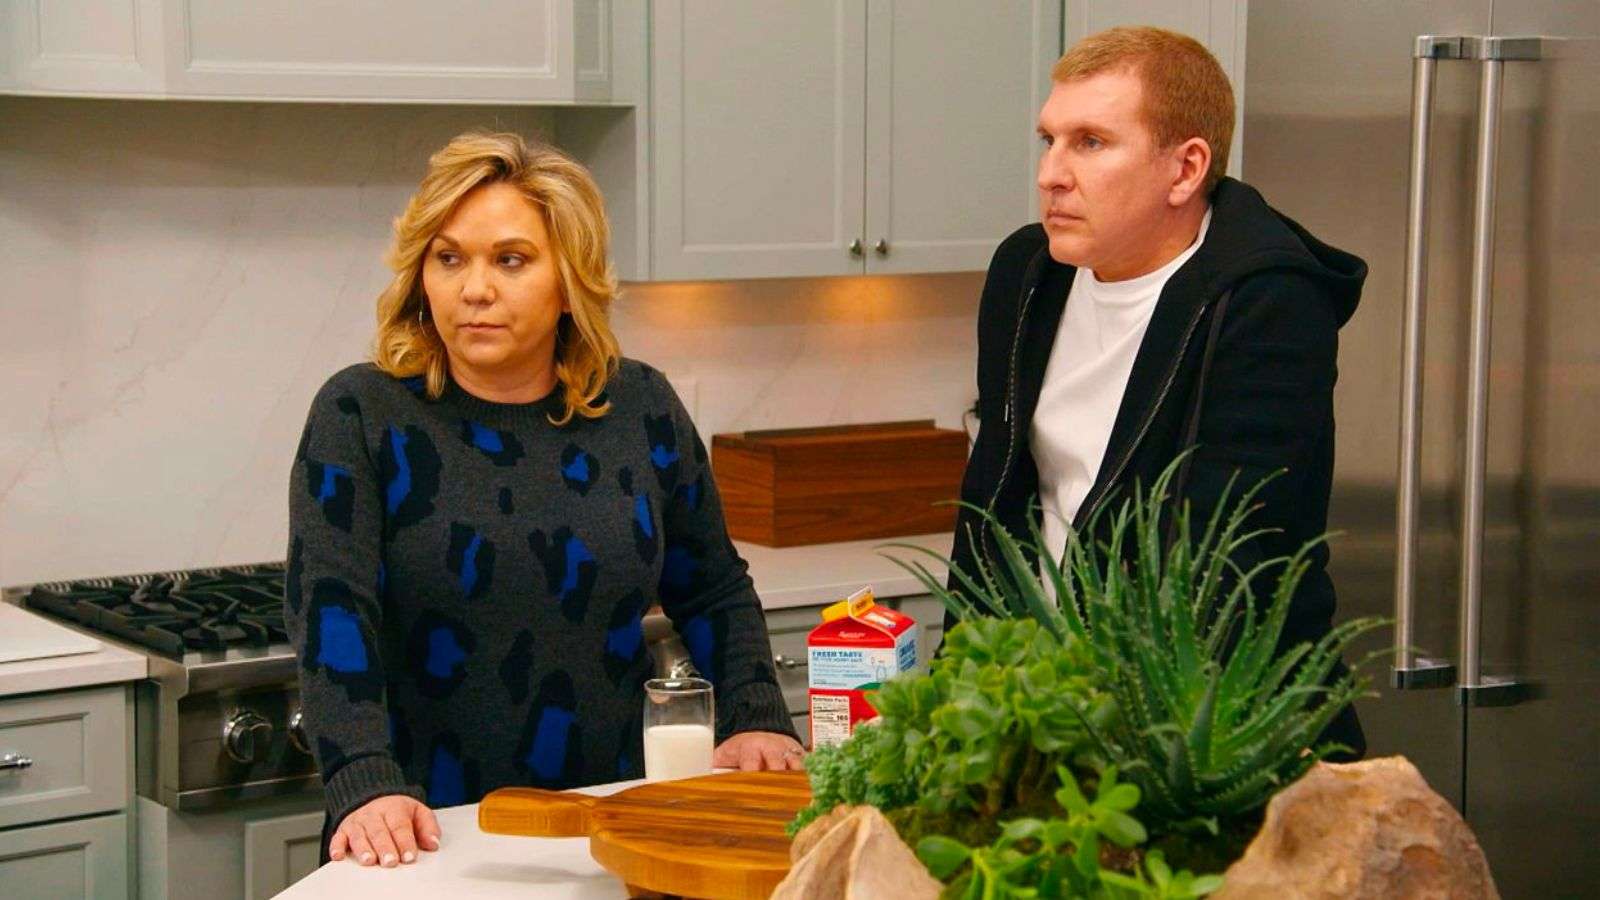 Todd and Julie in Chrisley Knows Best